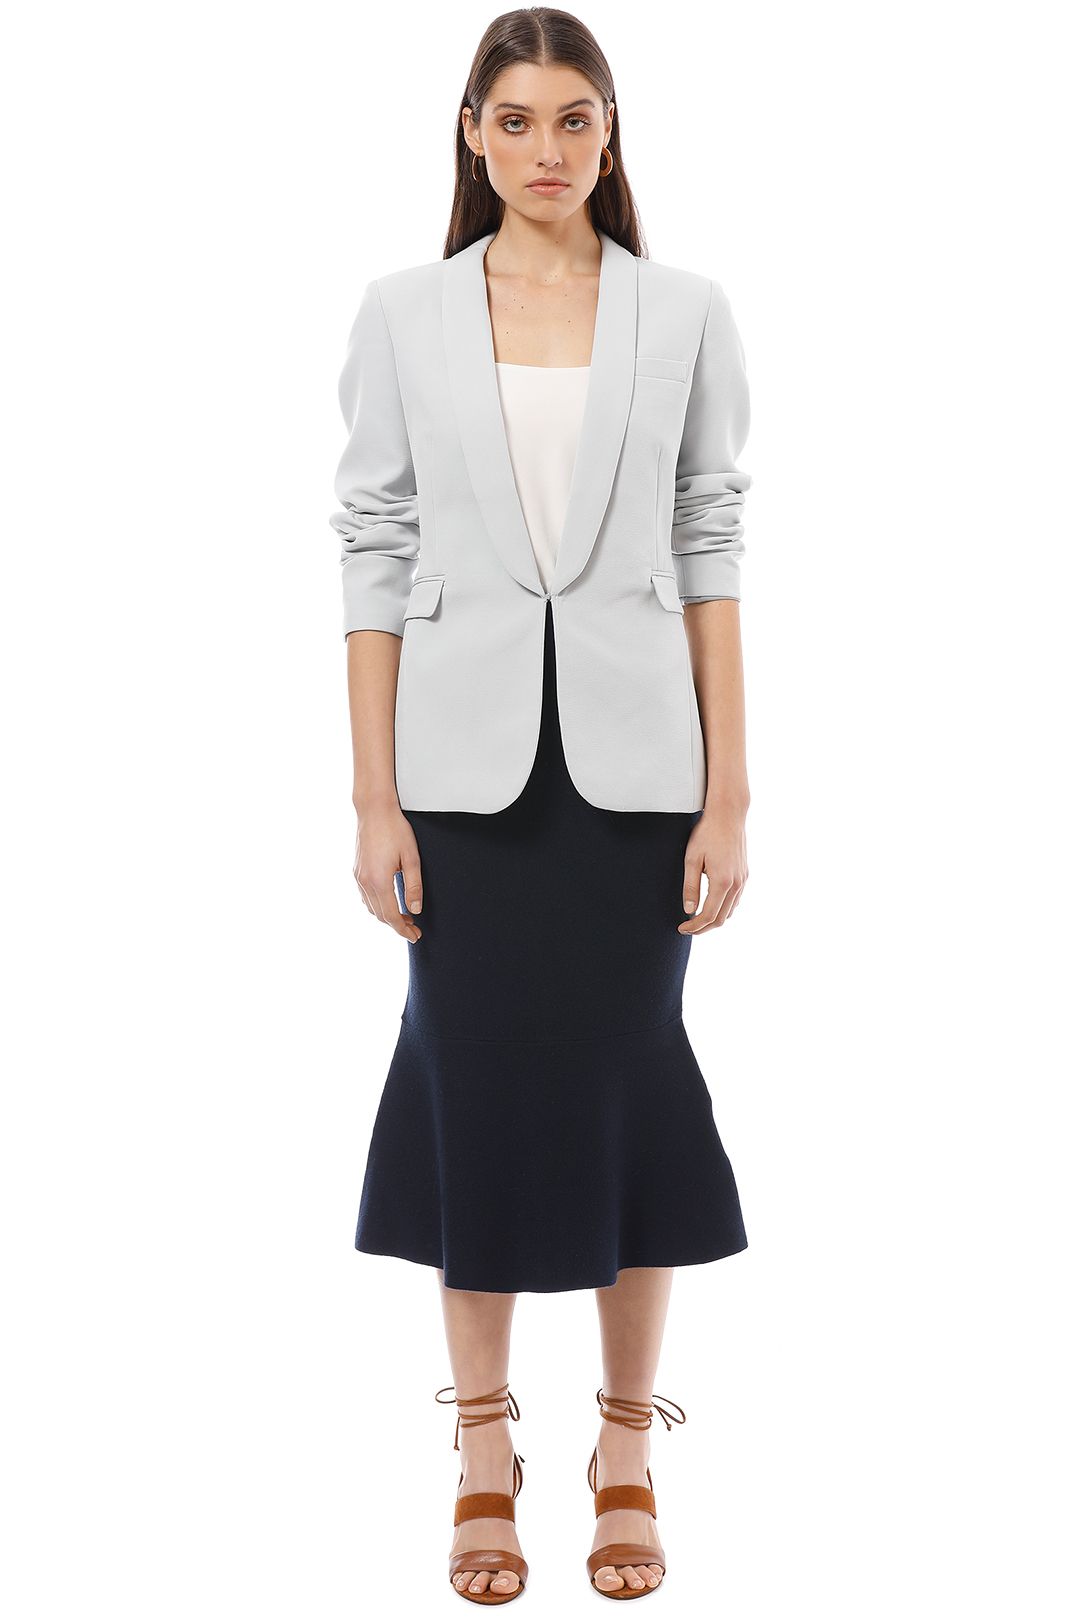 Friend of Audrey - Alma Fitted Blazer - Blue - Front